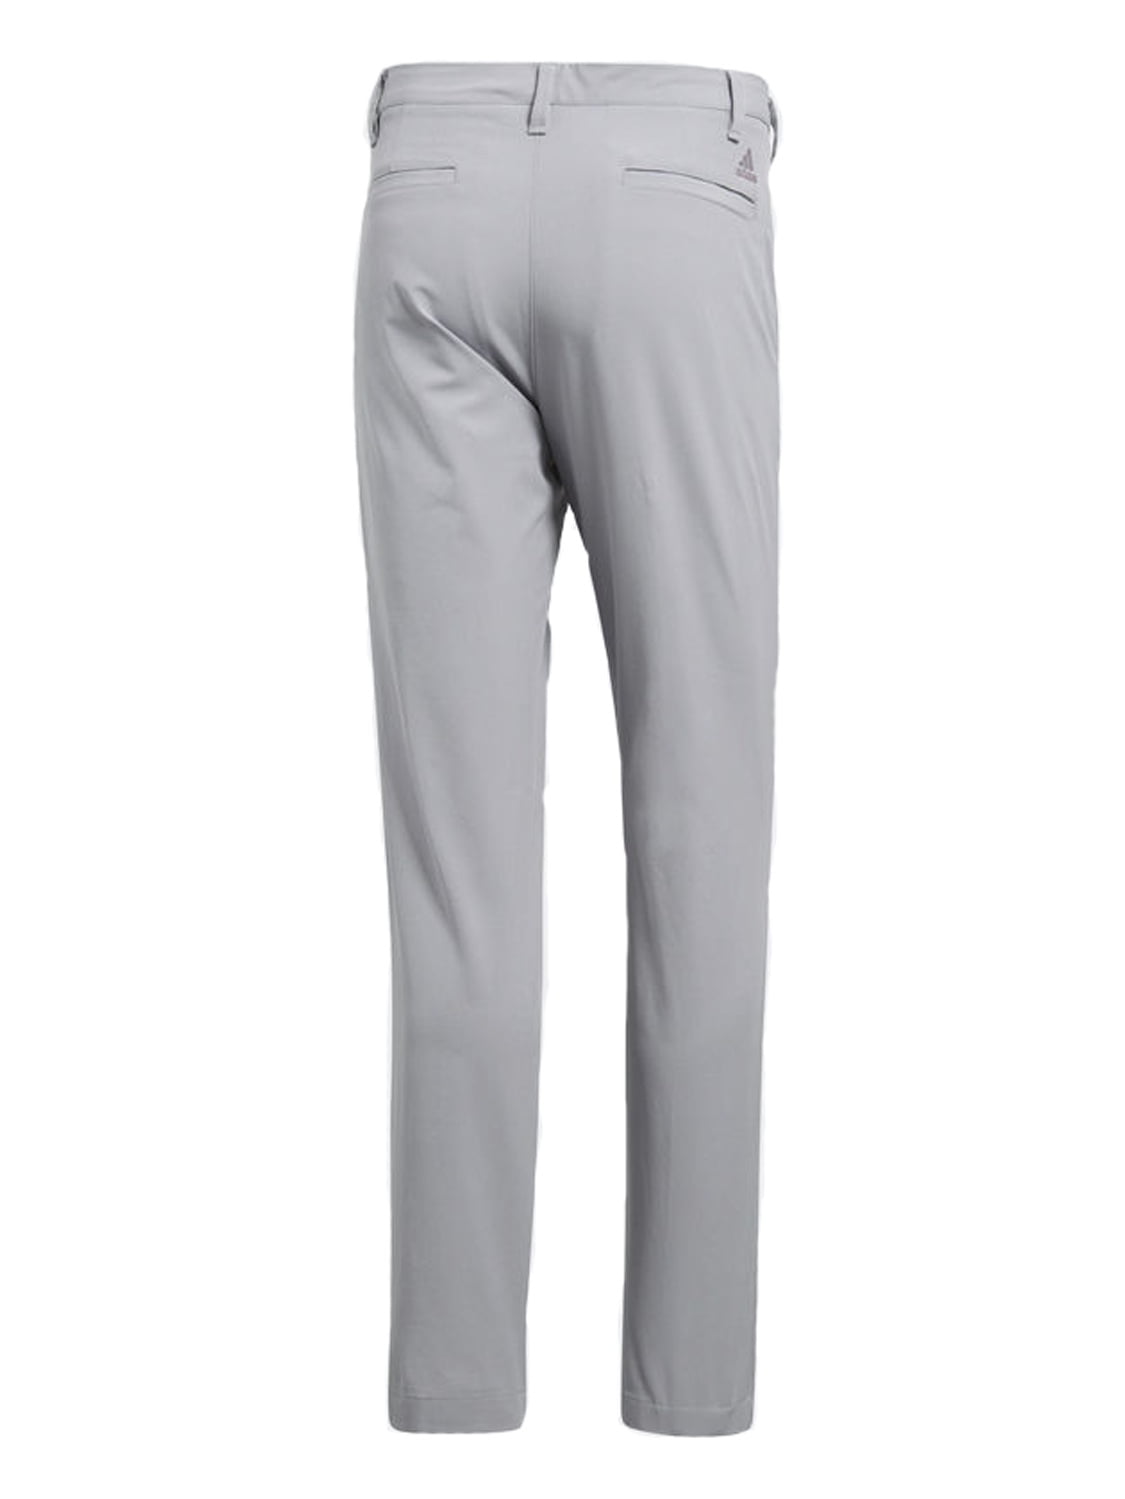 adidas ultimate tapered golf trousers